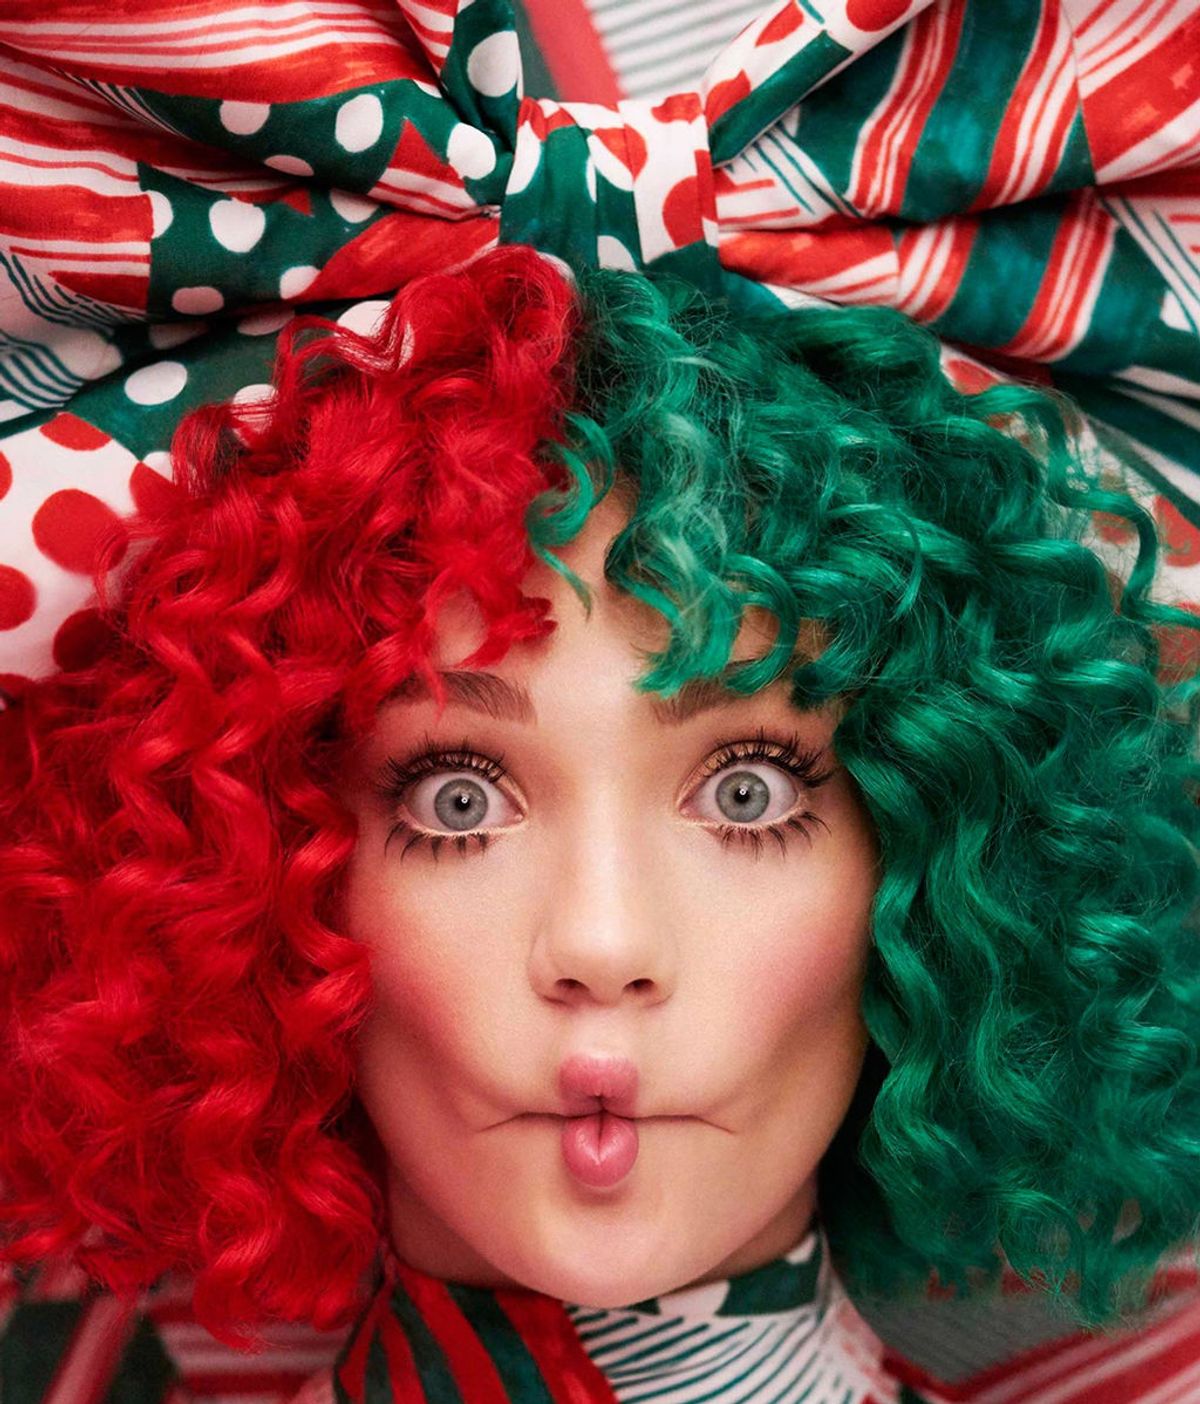 SIA every day is christmas